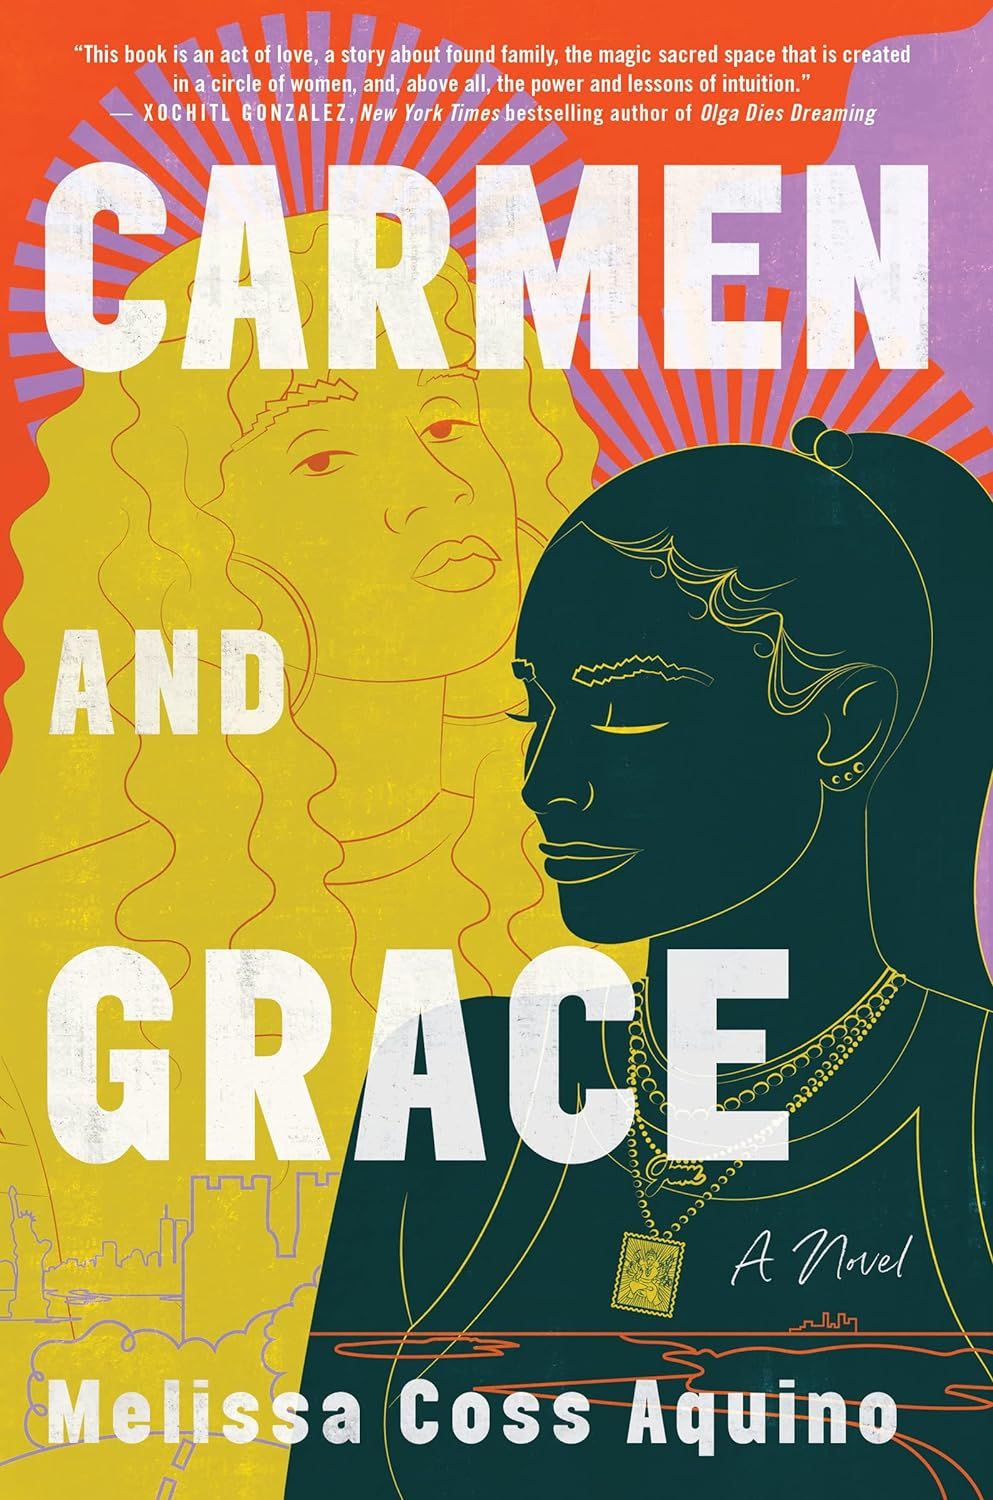 BookWoman BookGroup Discussion of Carmen and Grace